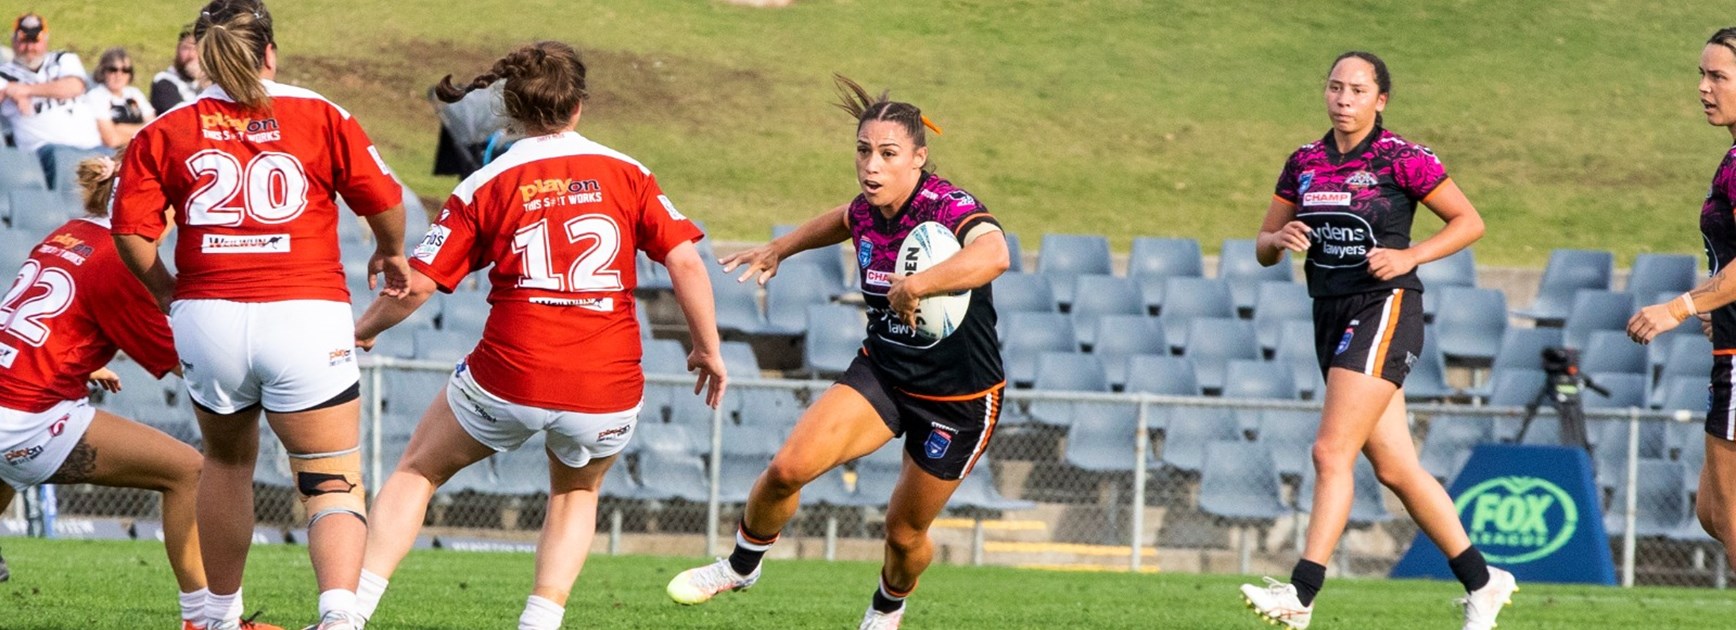 Wests Tigers women thrash Glebe to move into top four